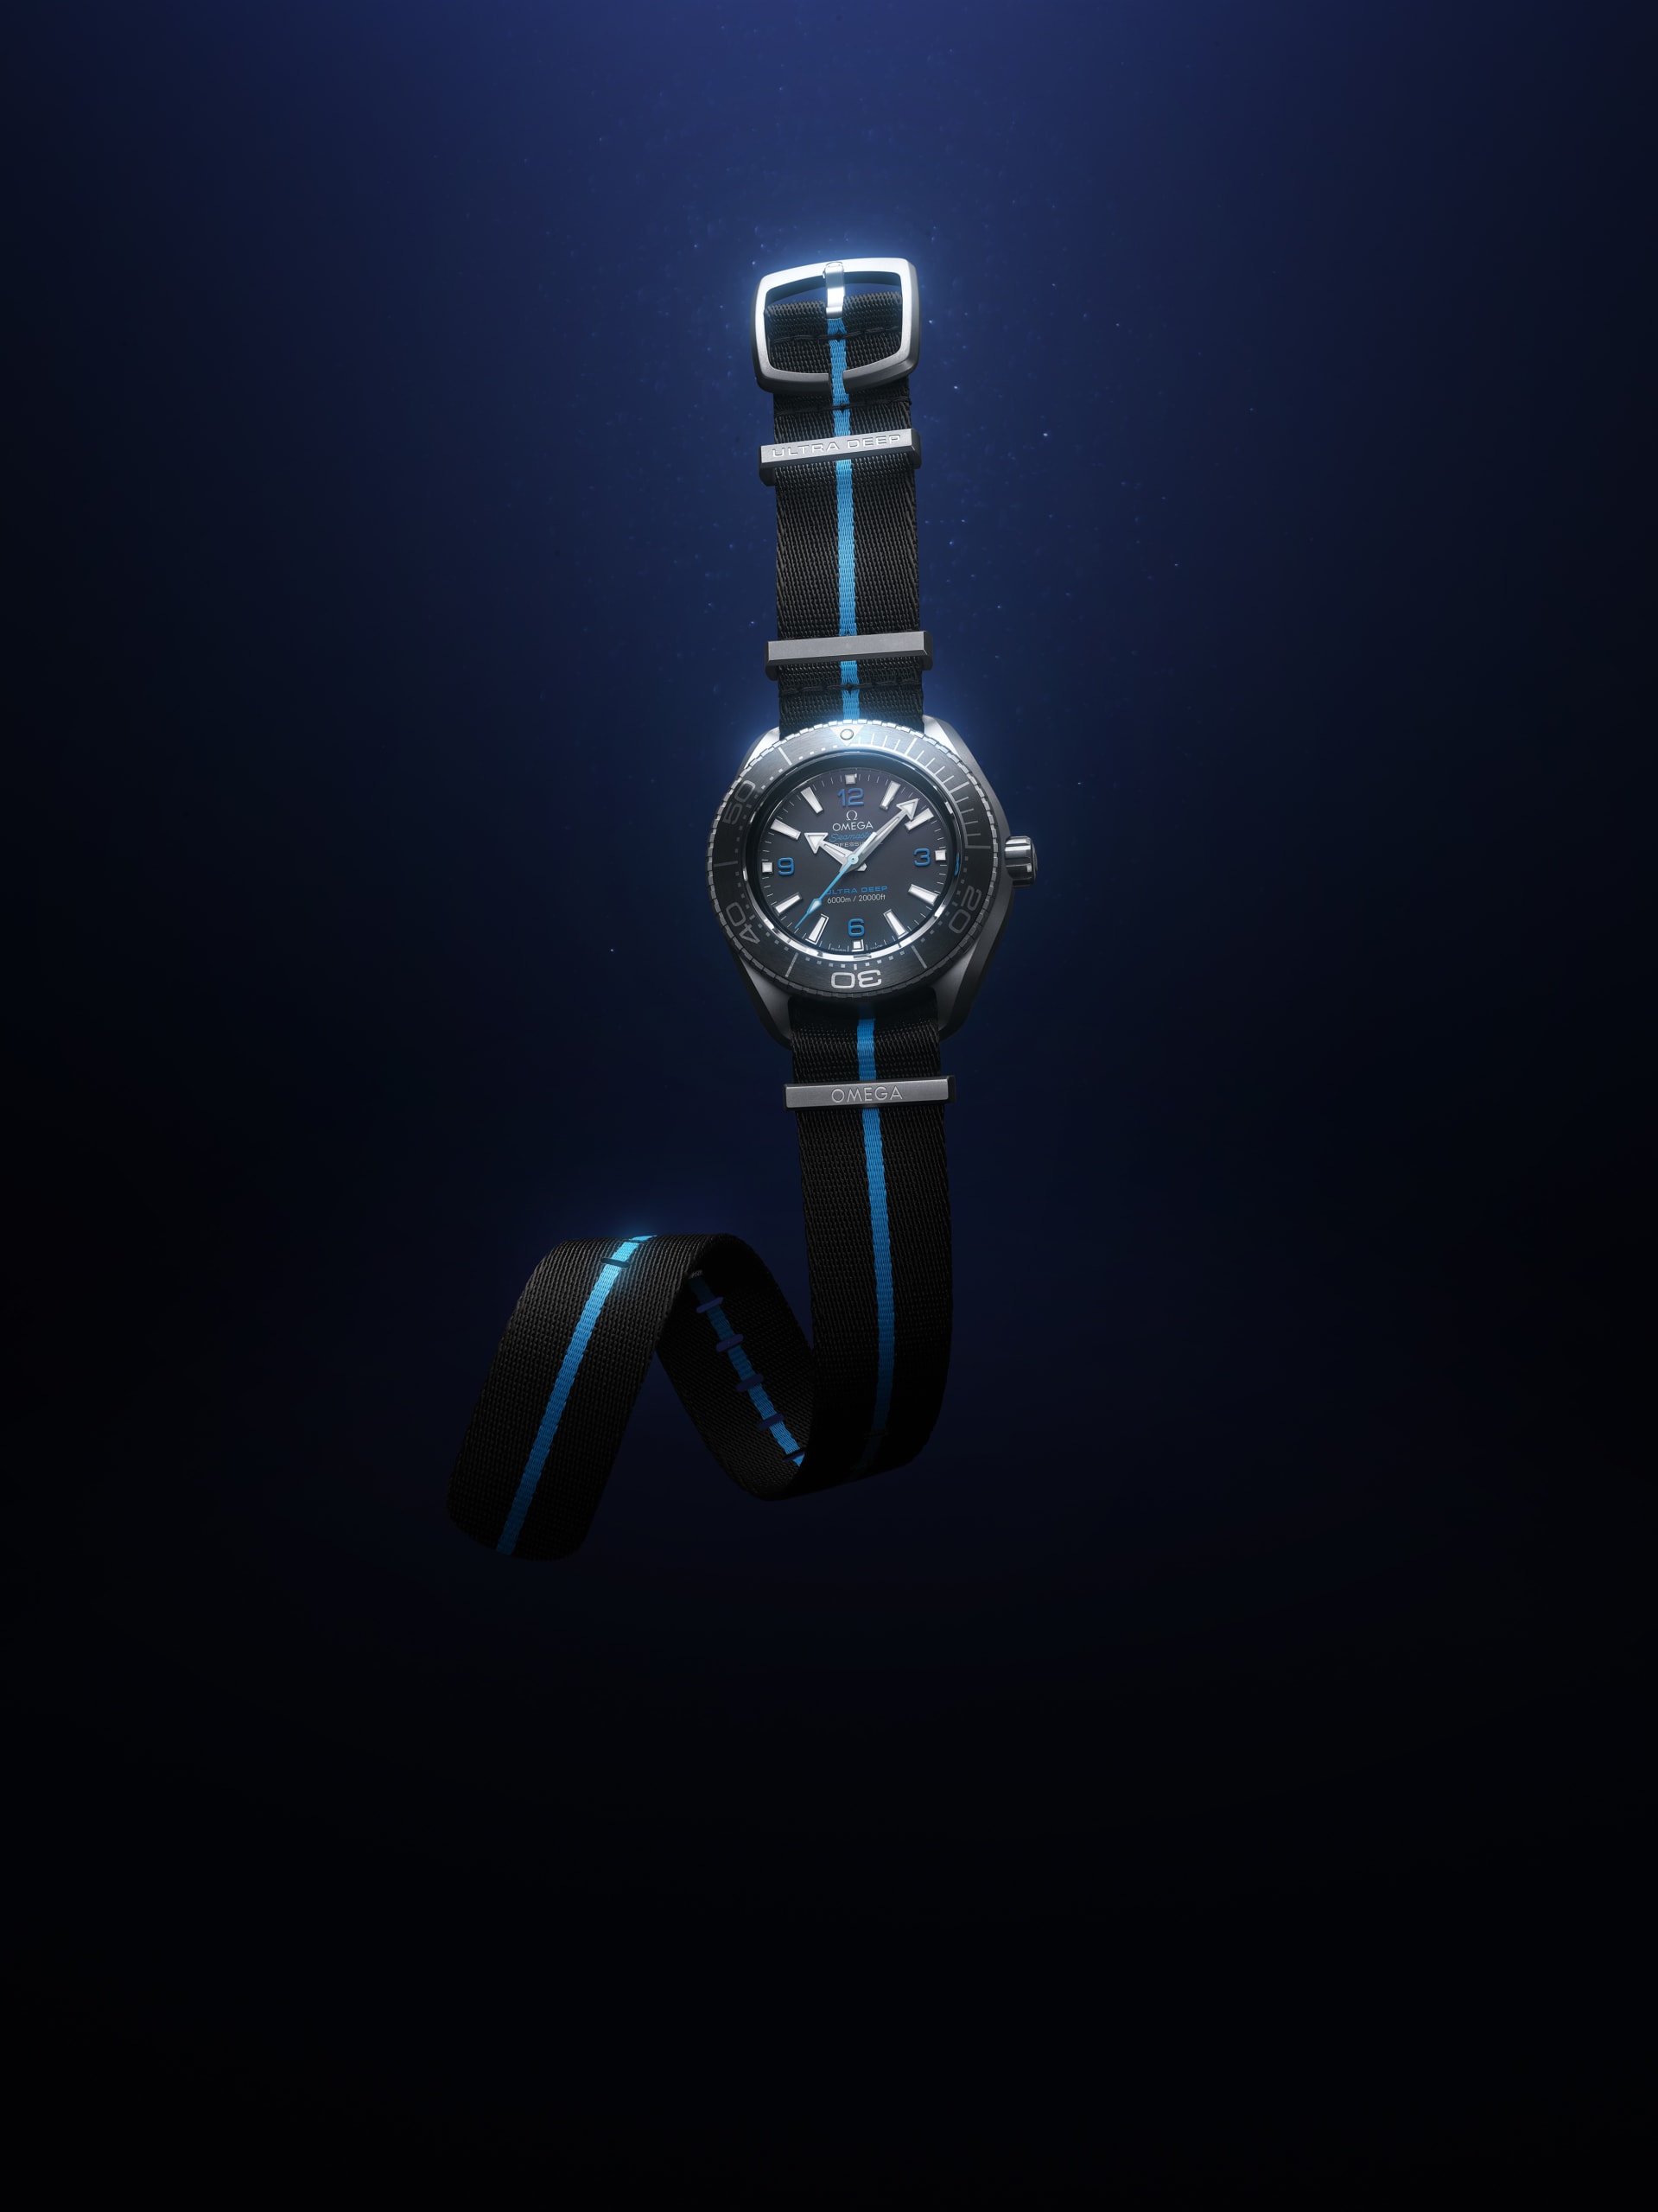 Omega's new Seamaster Planet Ocean Ultra Deep OMEGA_215.92.46.21.01.001-scaled